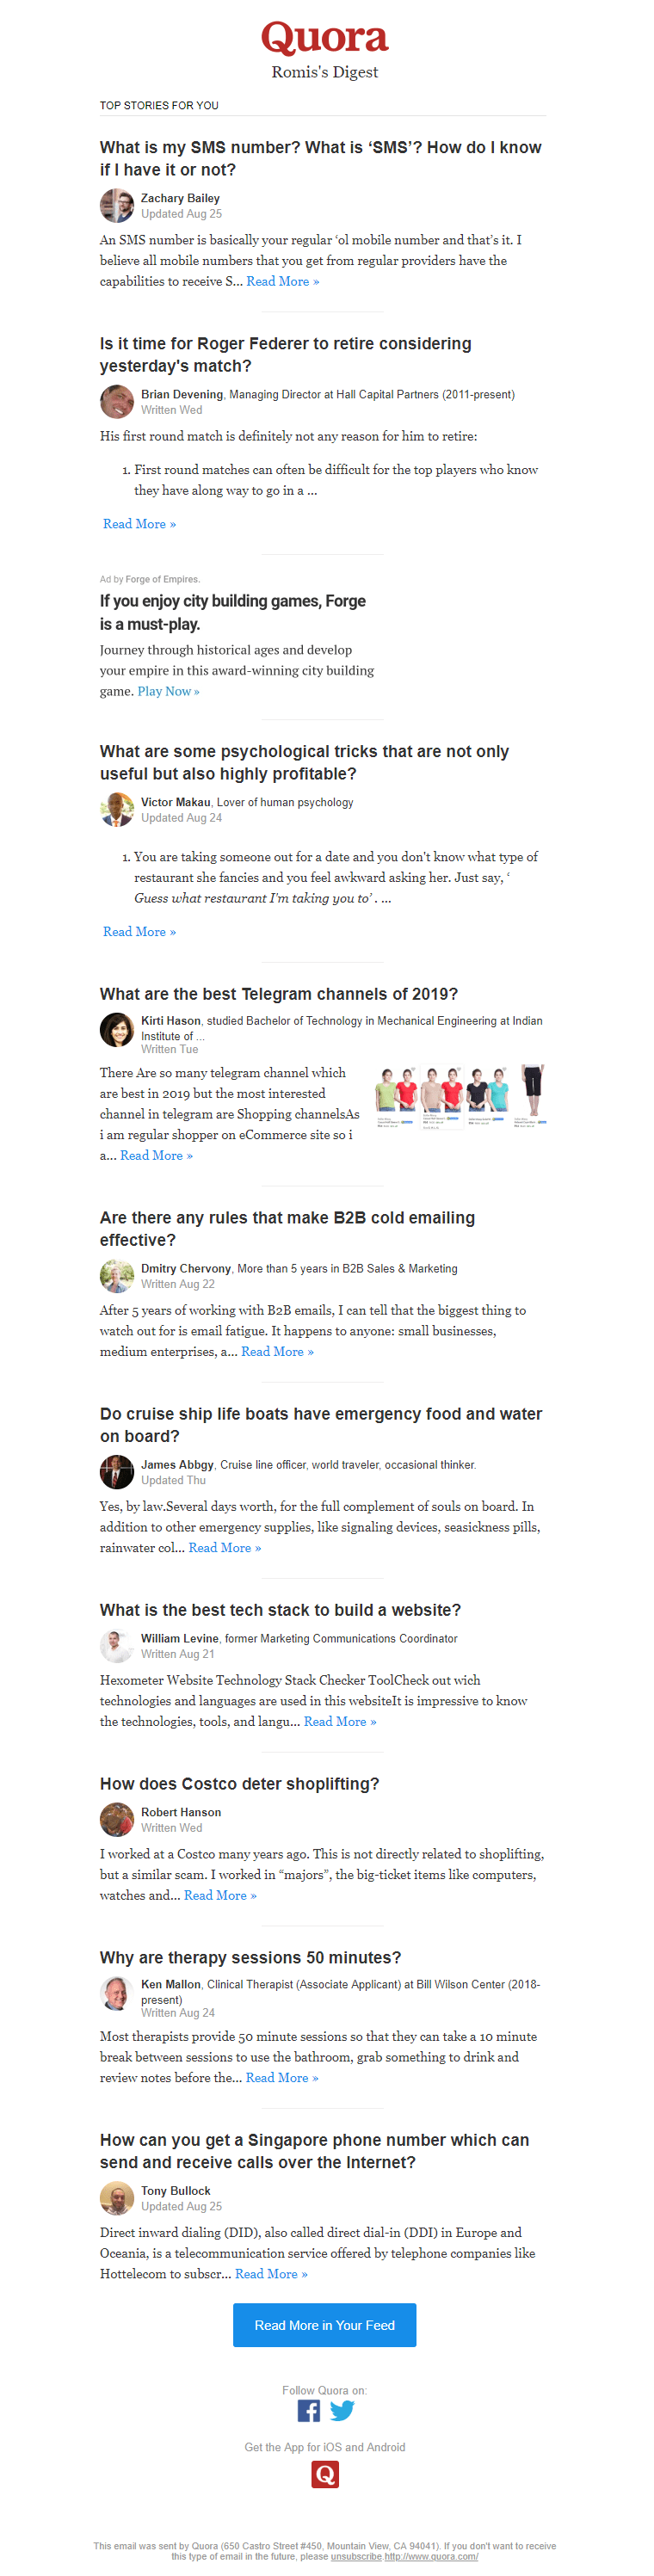 Quora personalized digest